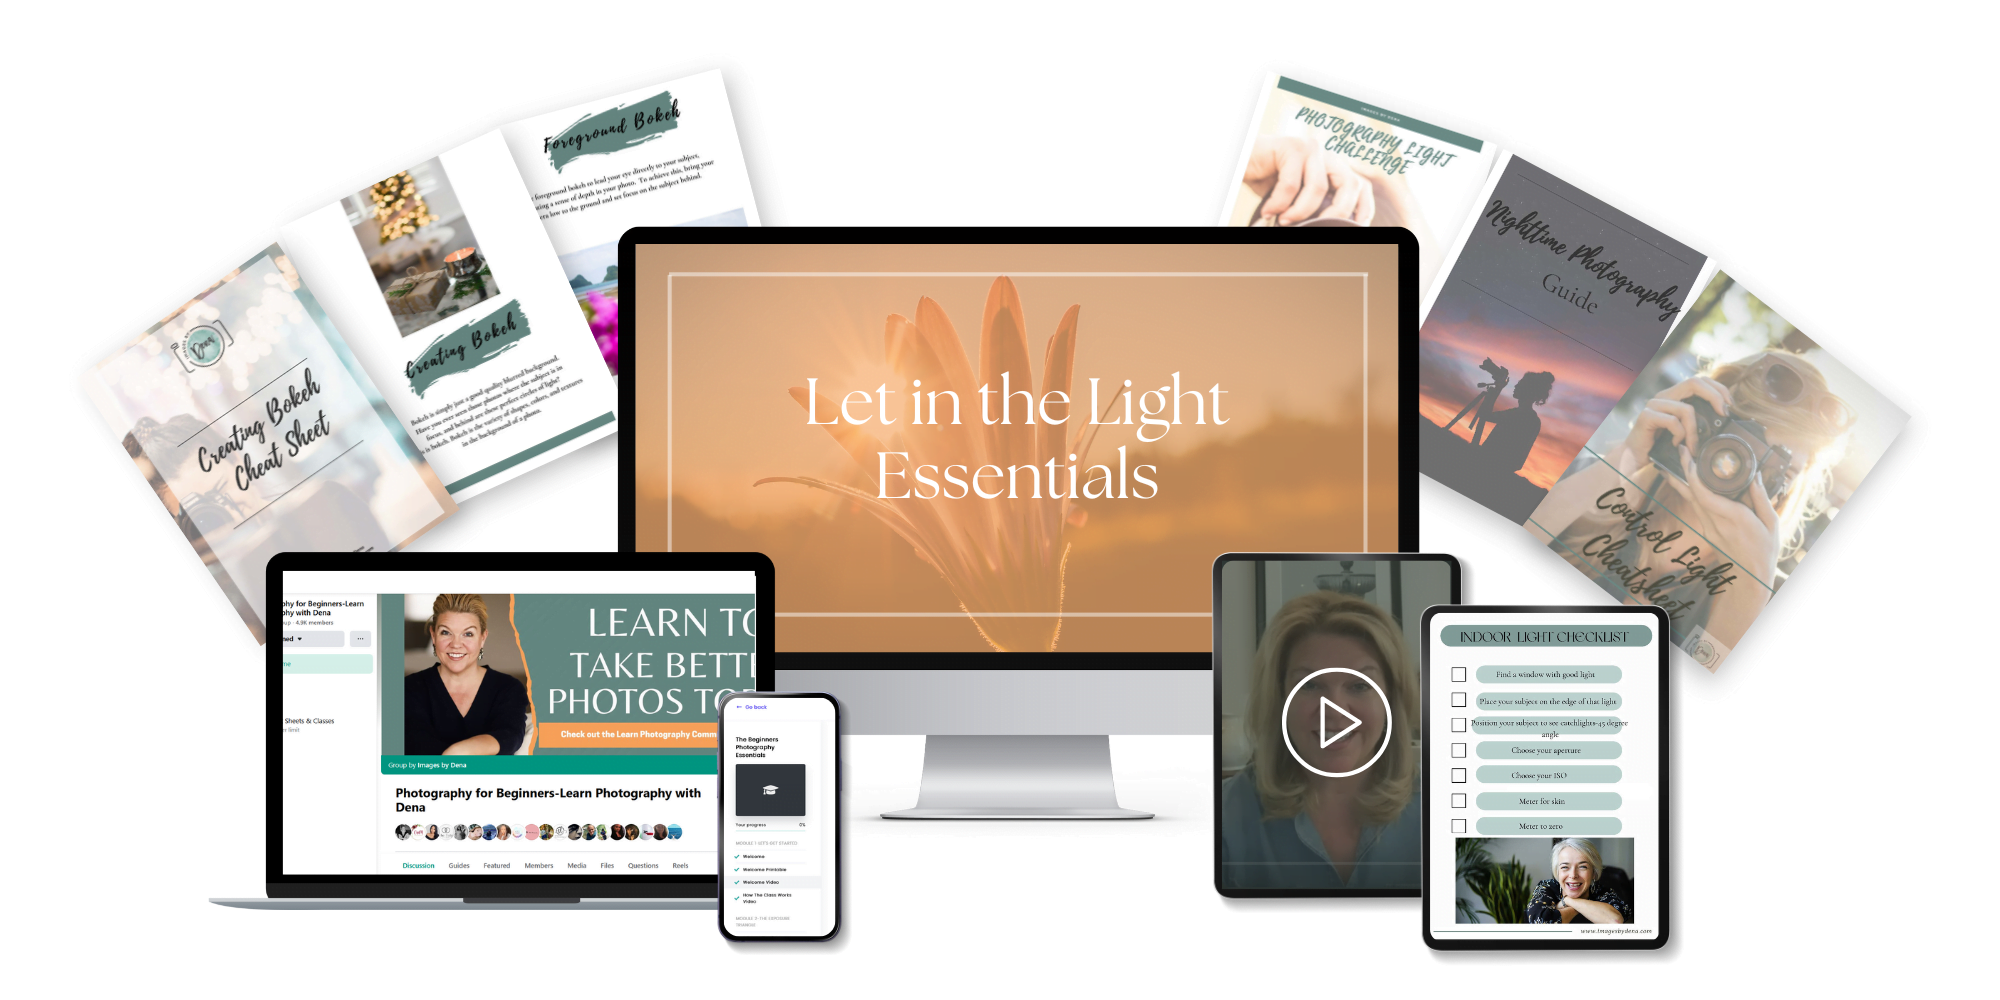 Let in the Light Essentials Course Preview